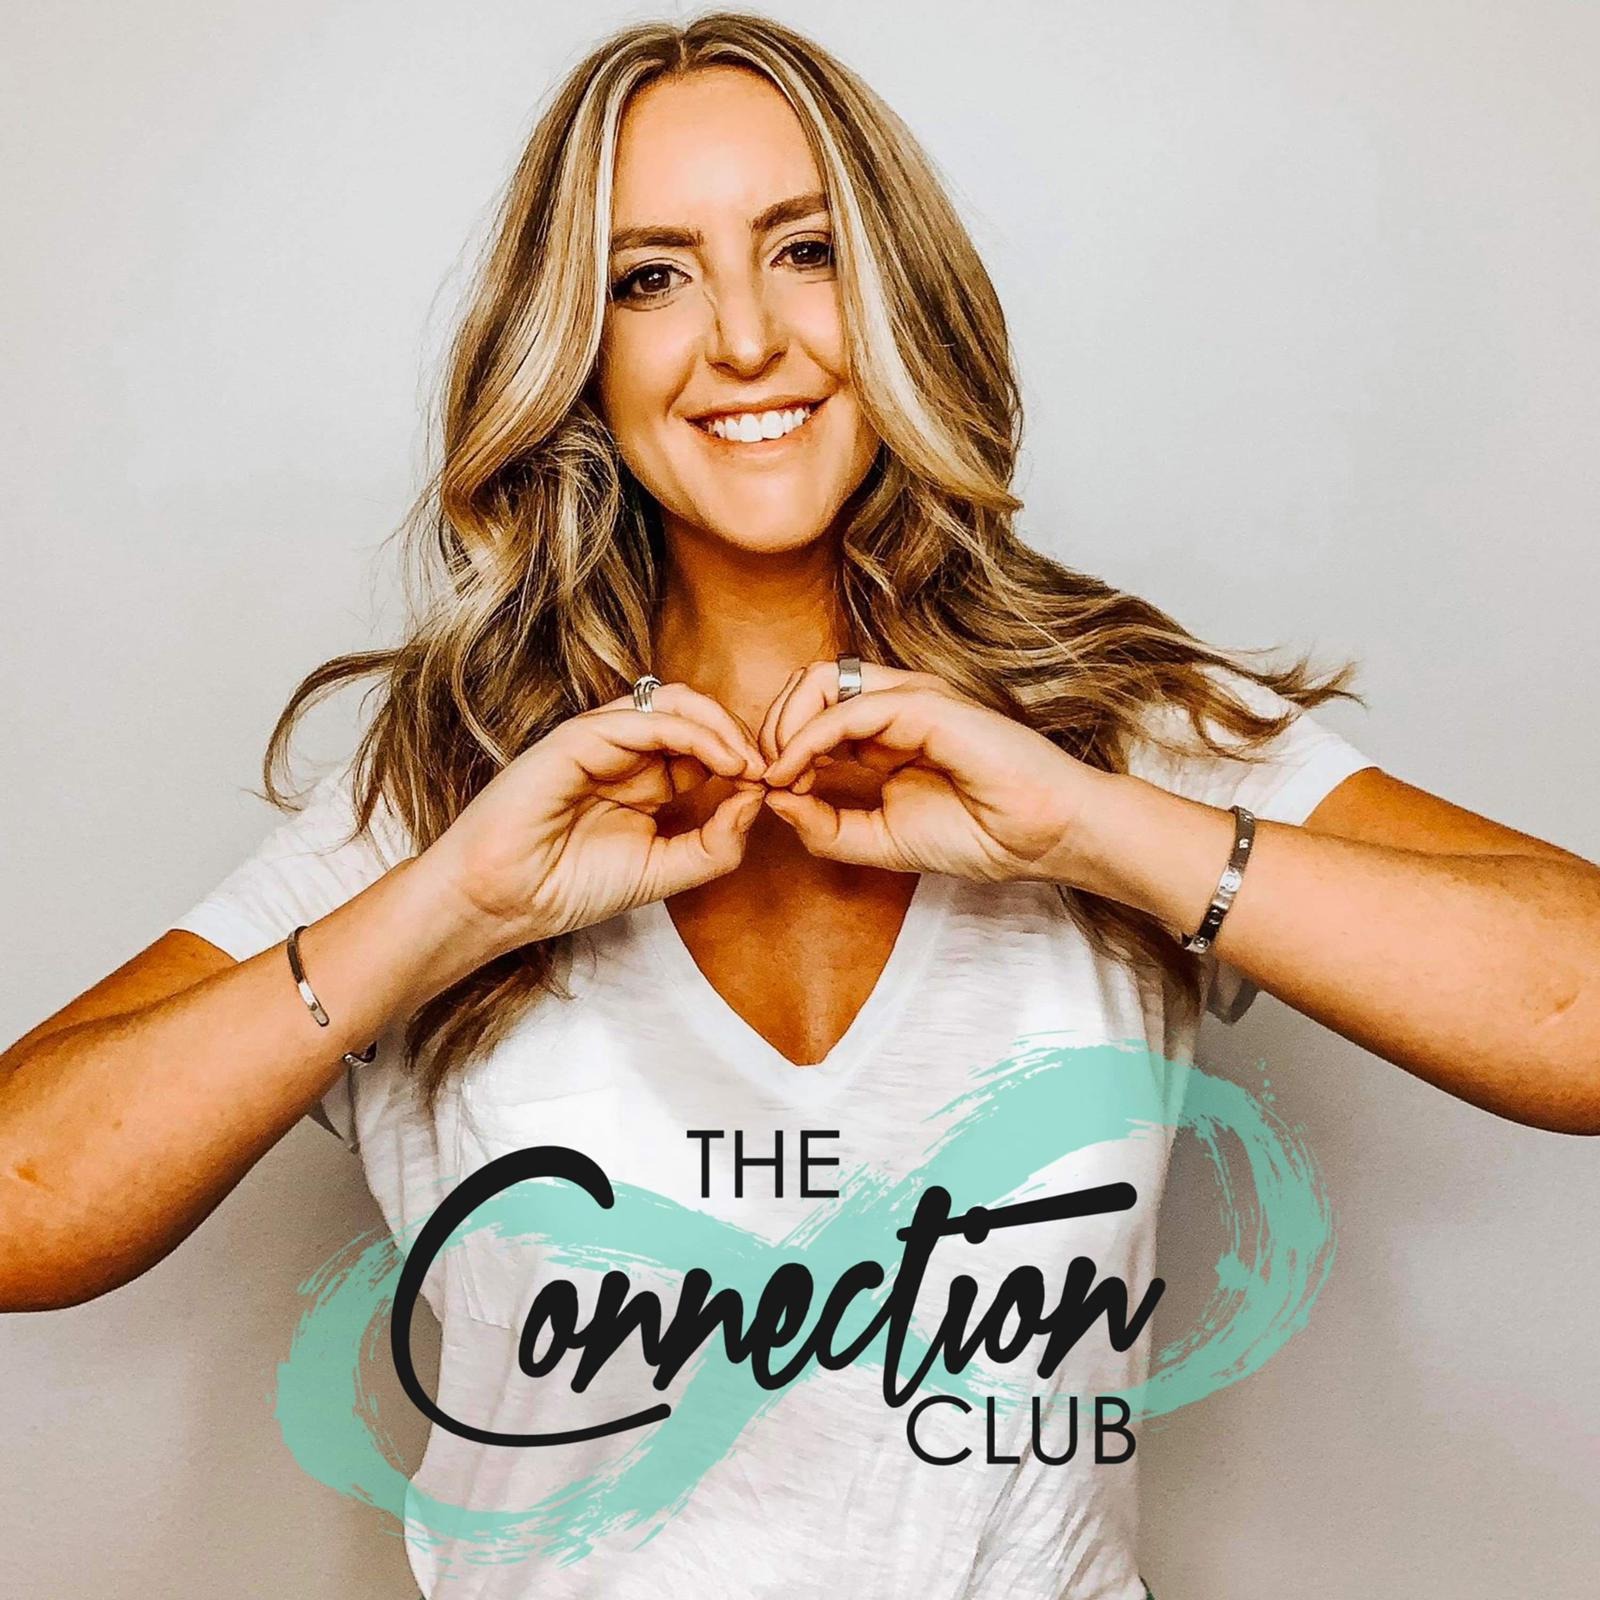 The Connection Club